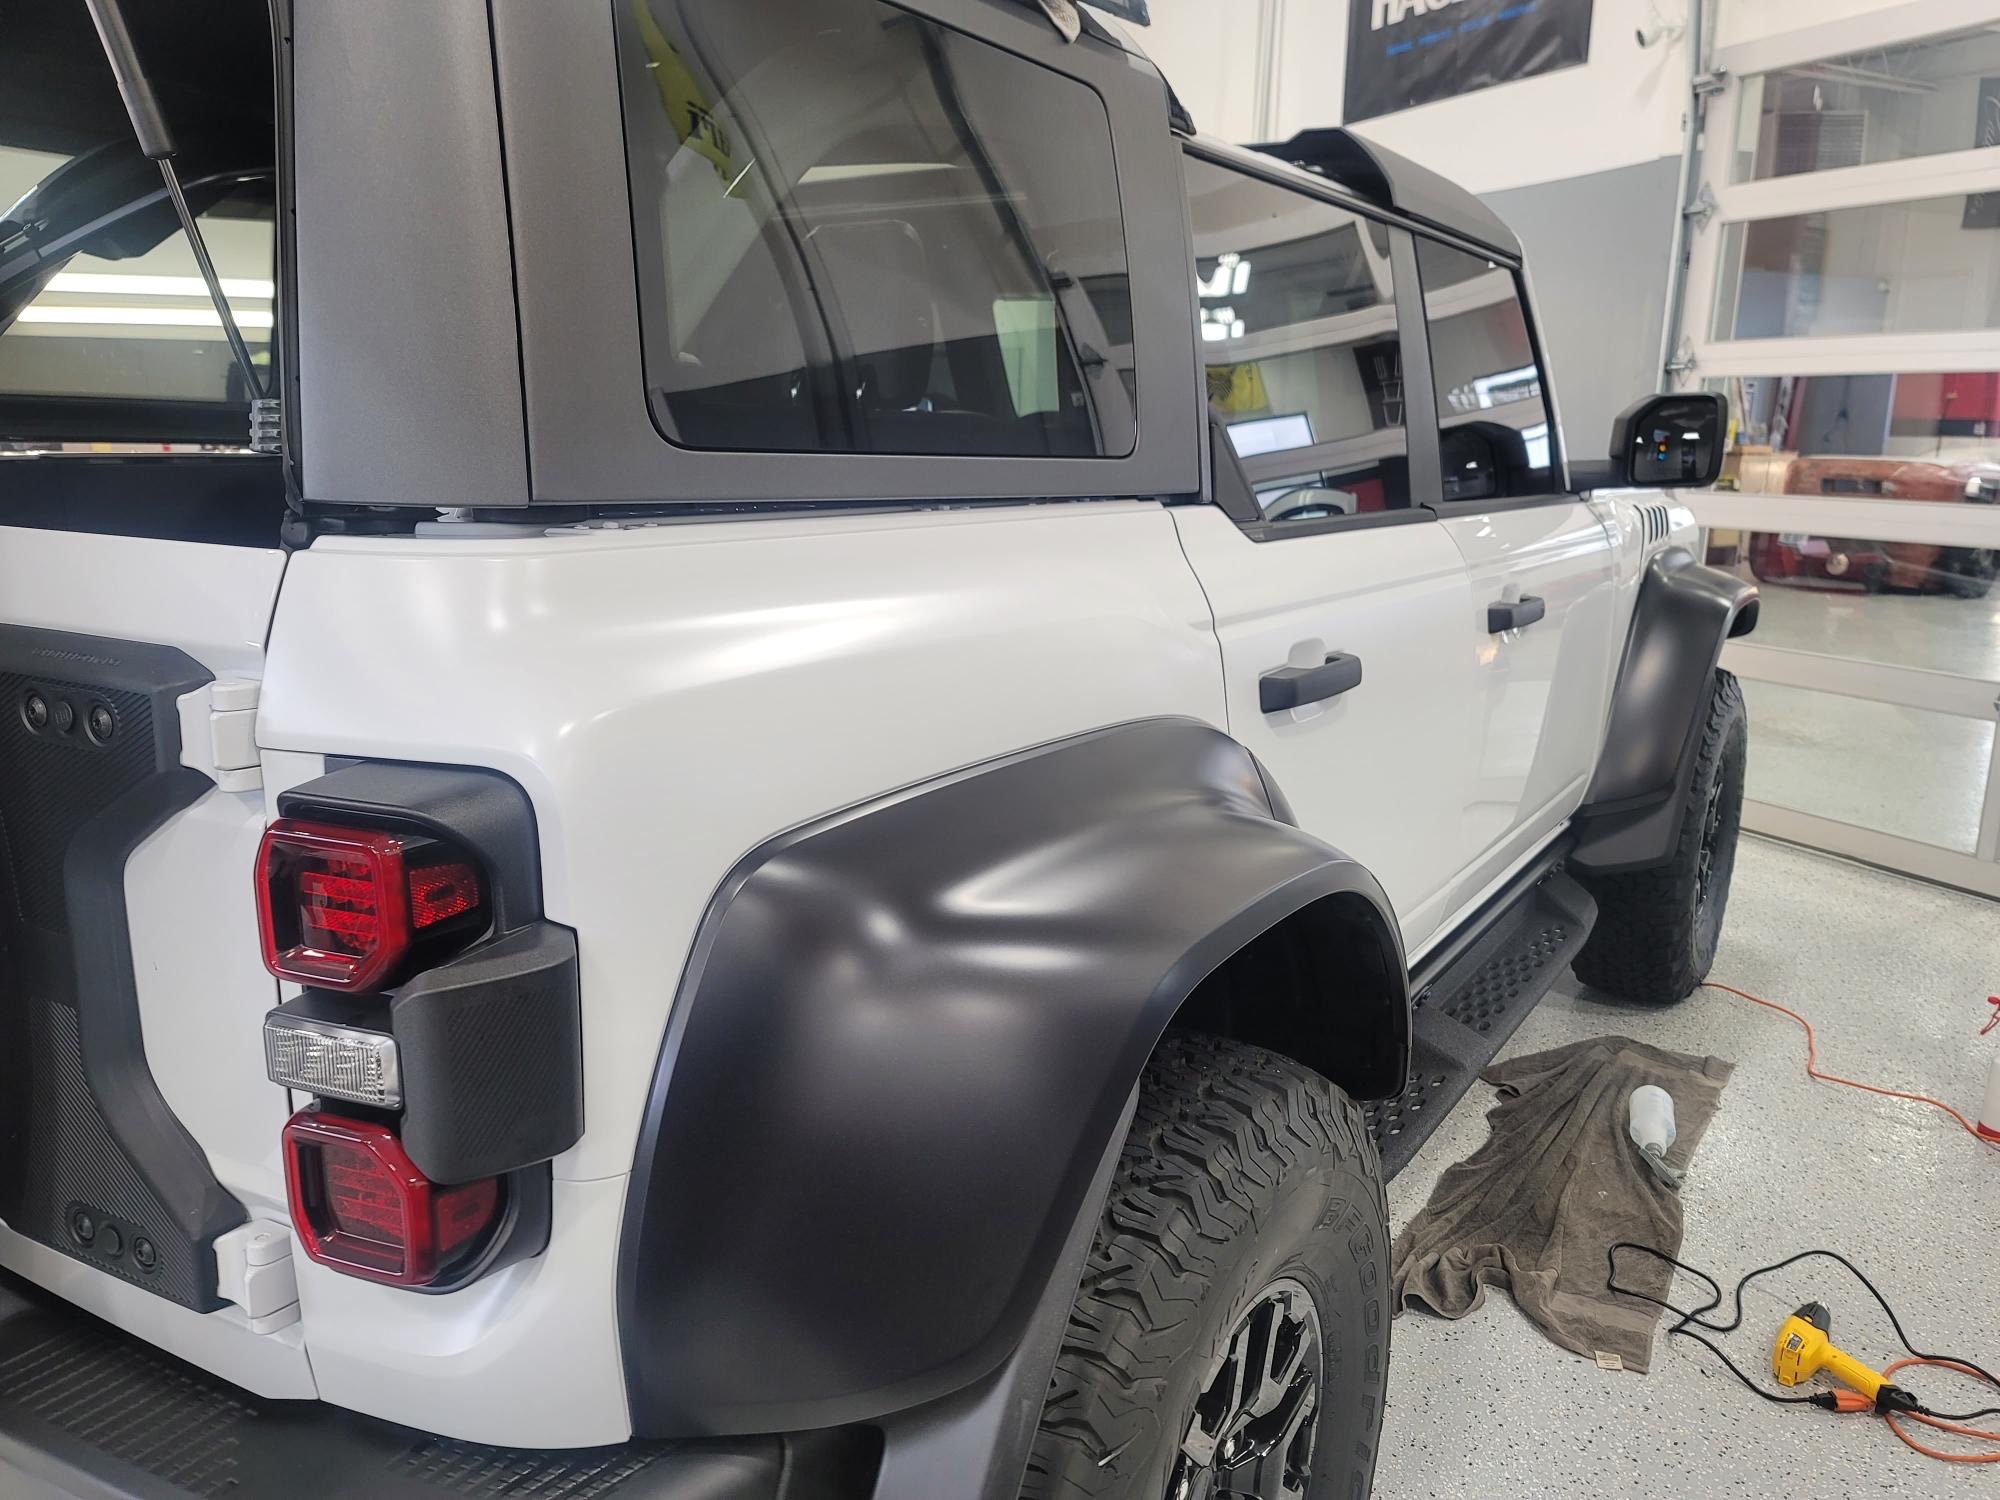 Ford Bronco XPEL Stealth PPF Wrap Completed on Bronco Raptor in Oxford White Resized_20230501_145204